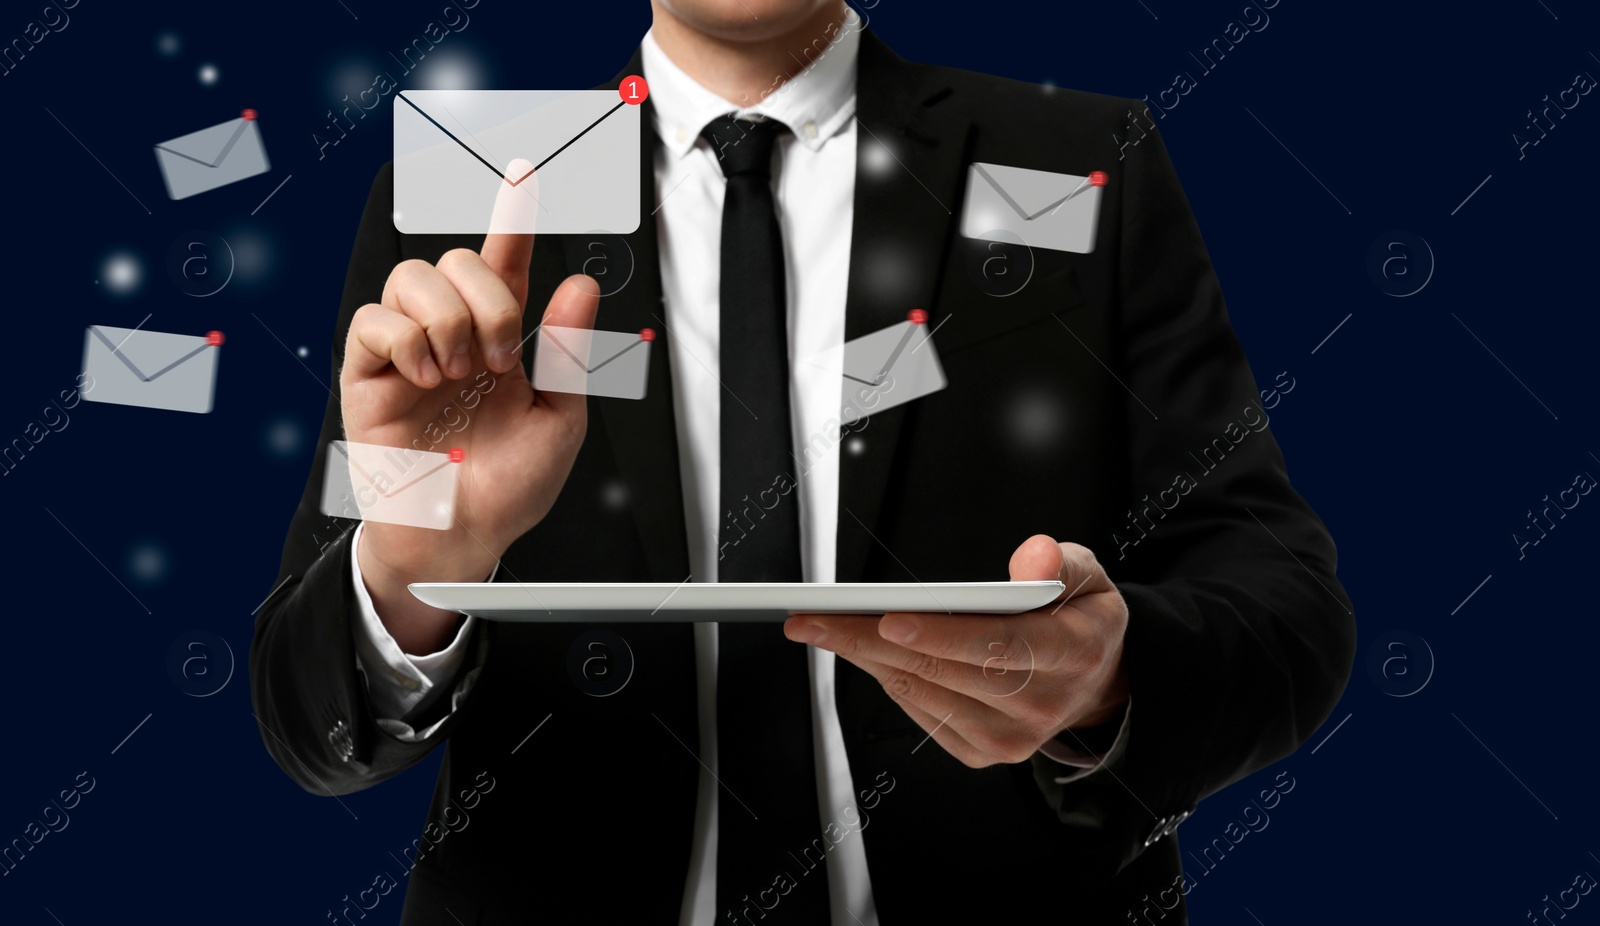 Image of Incoming email. Man touching virtual envelope over tablet against dark blue background, closeup